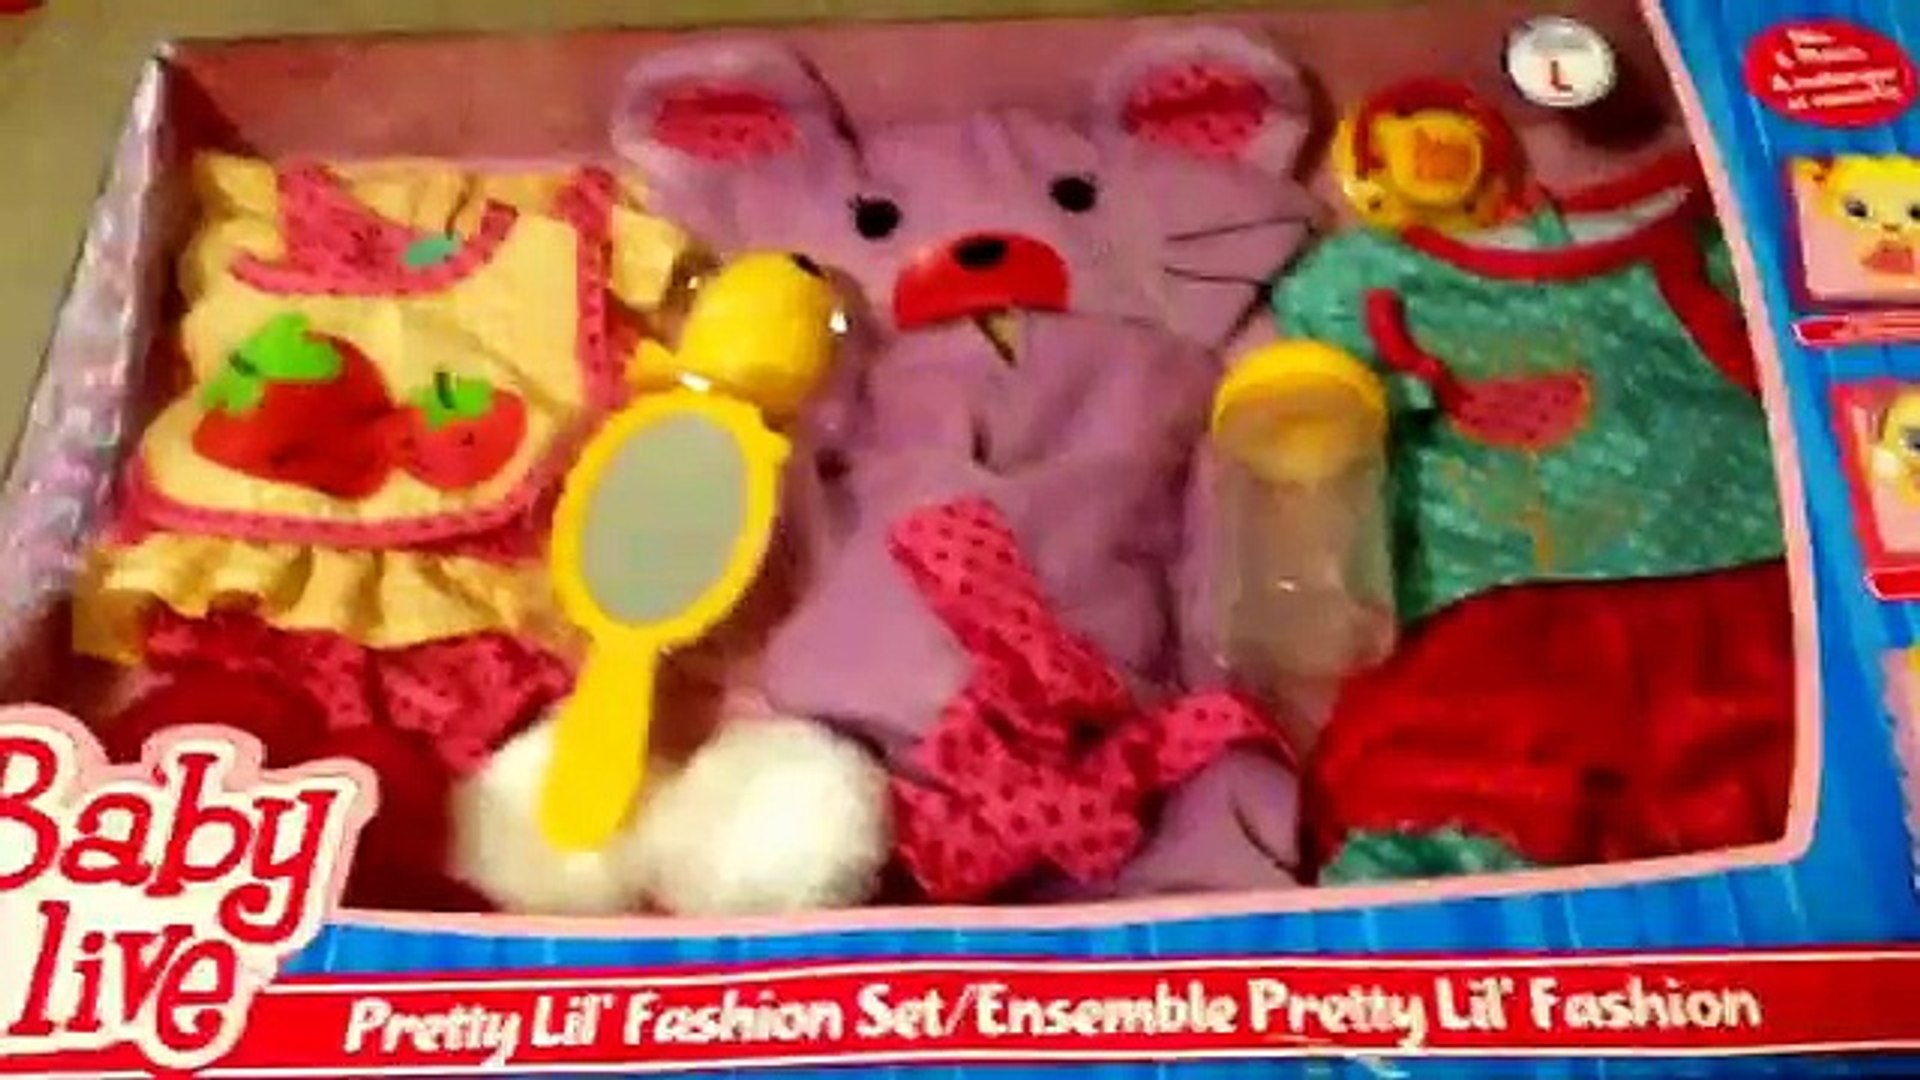 ⁣Baby Alive Pretty Lil Fashion Set Unboxing